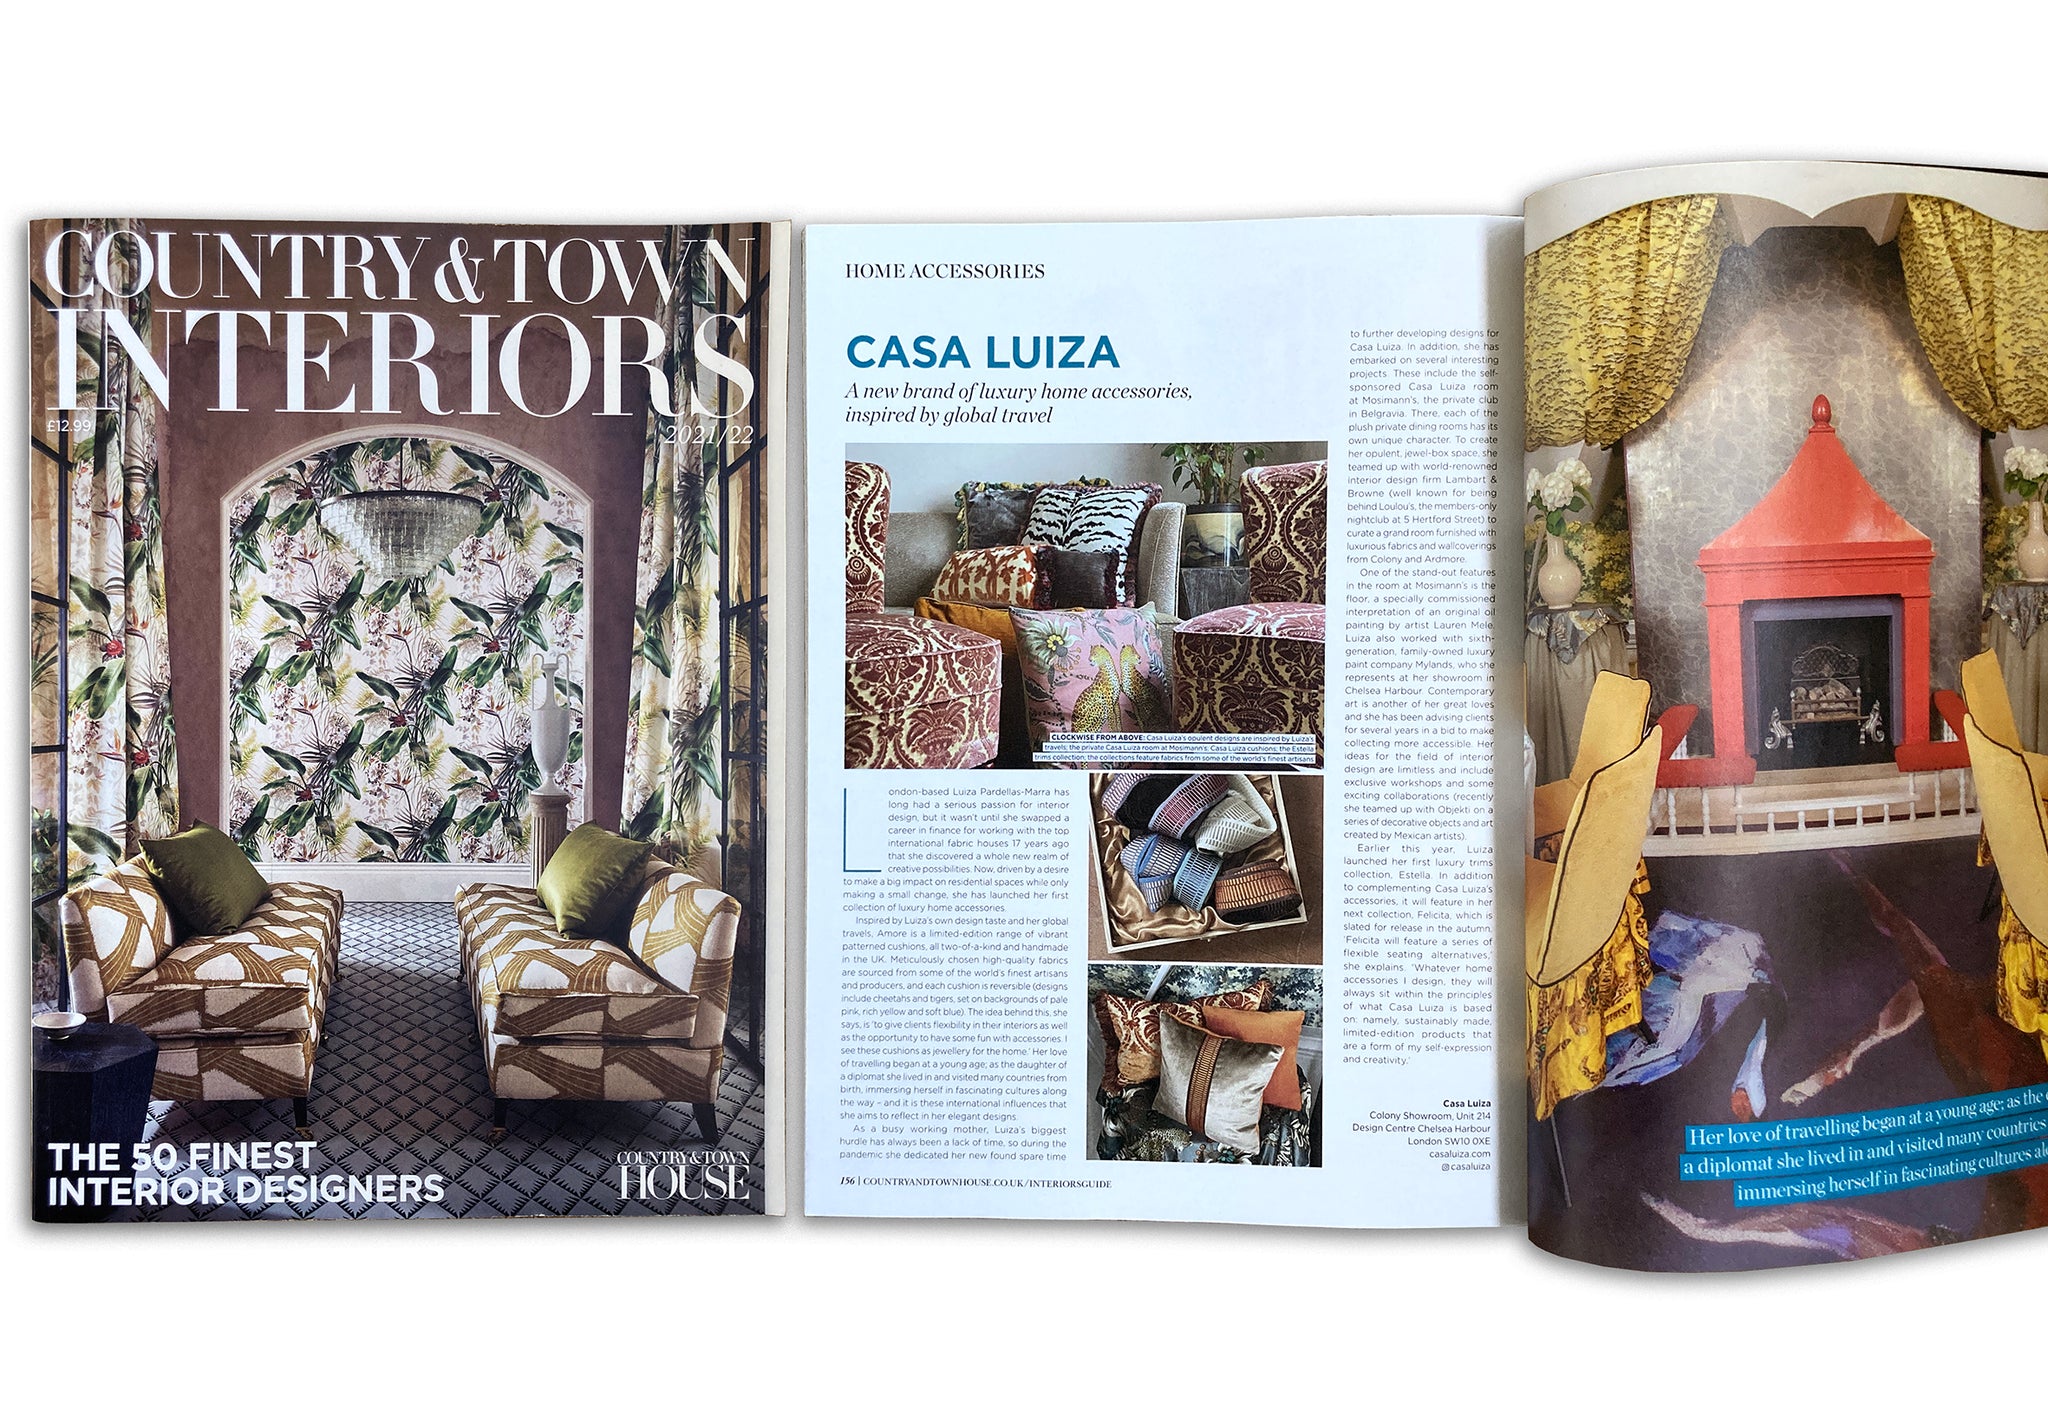 Casa Luiza featured in Country & Town Interiors 2021/22